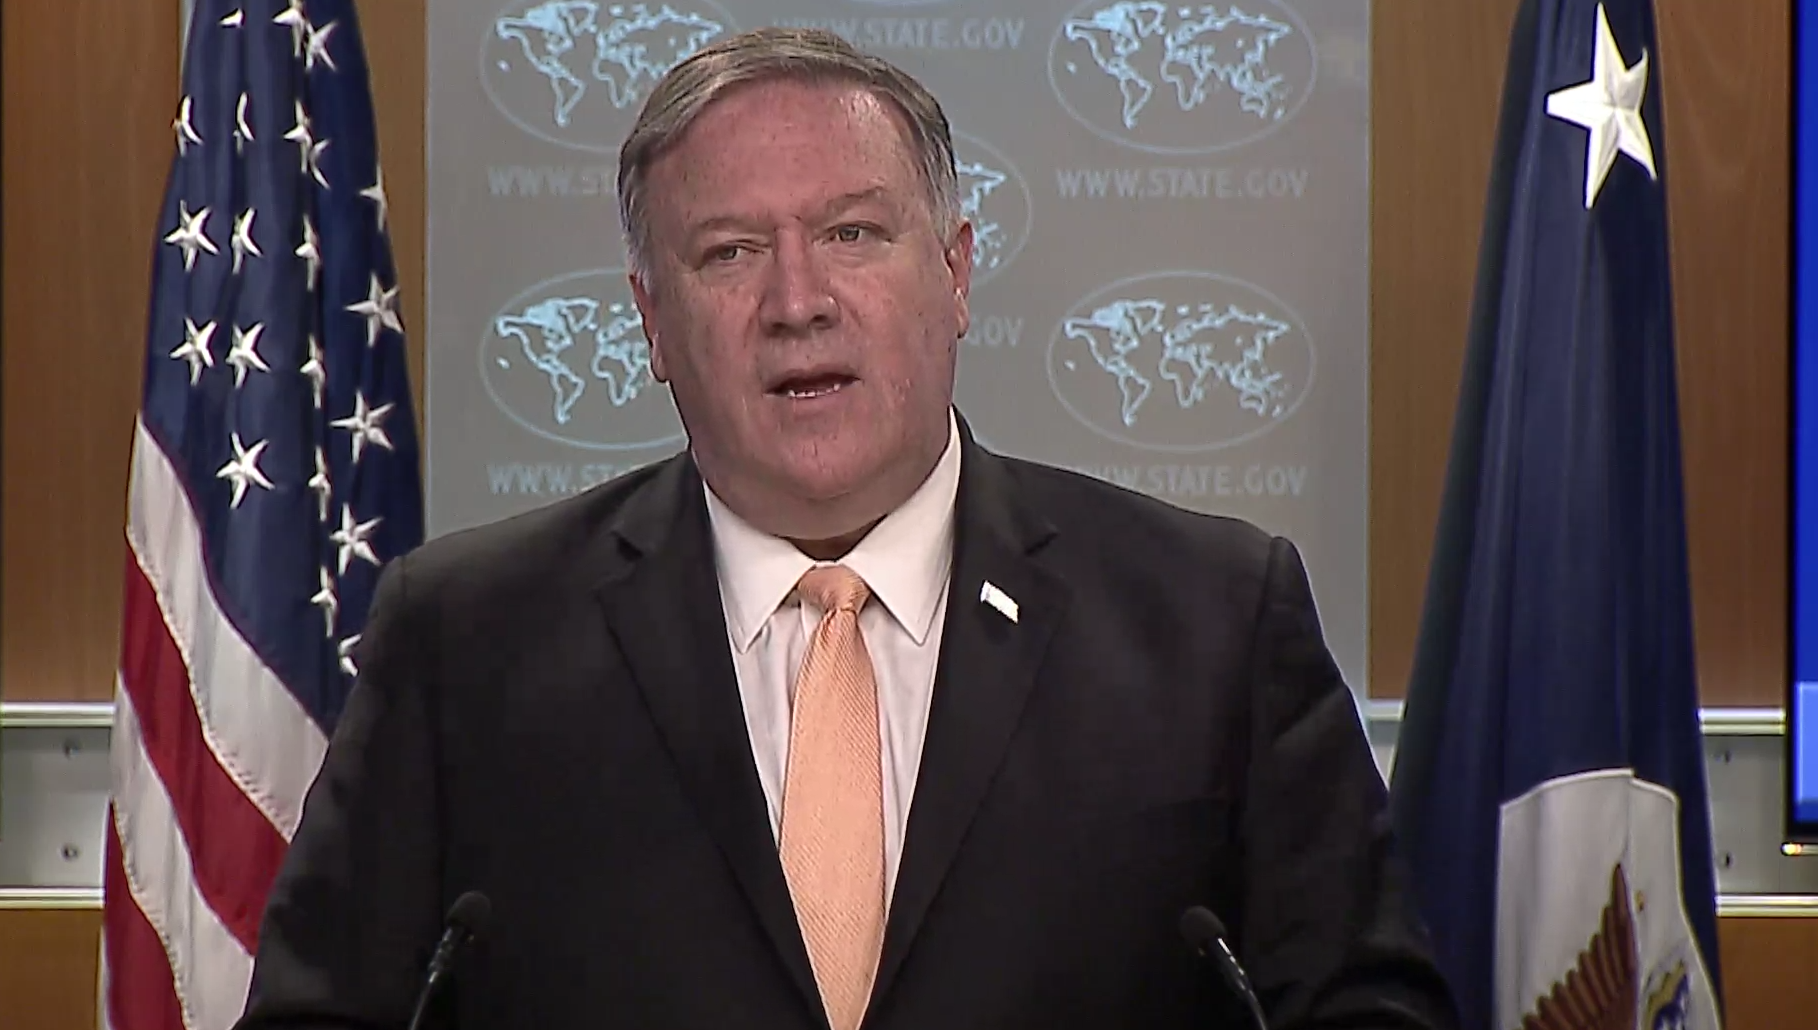 Pompeo says Iran has engaged in an escalating series of threatening actions and statements in recent weeks